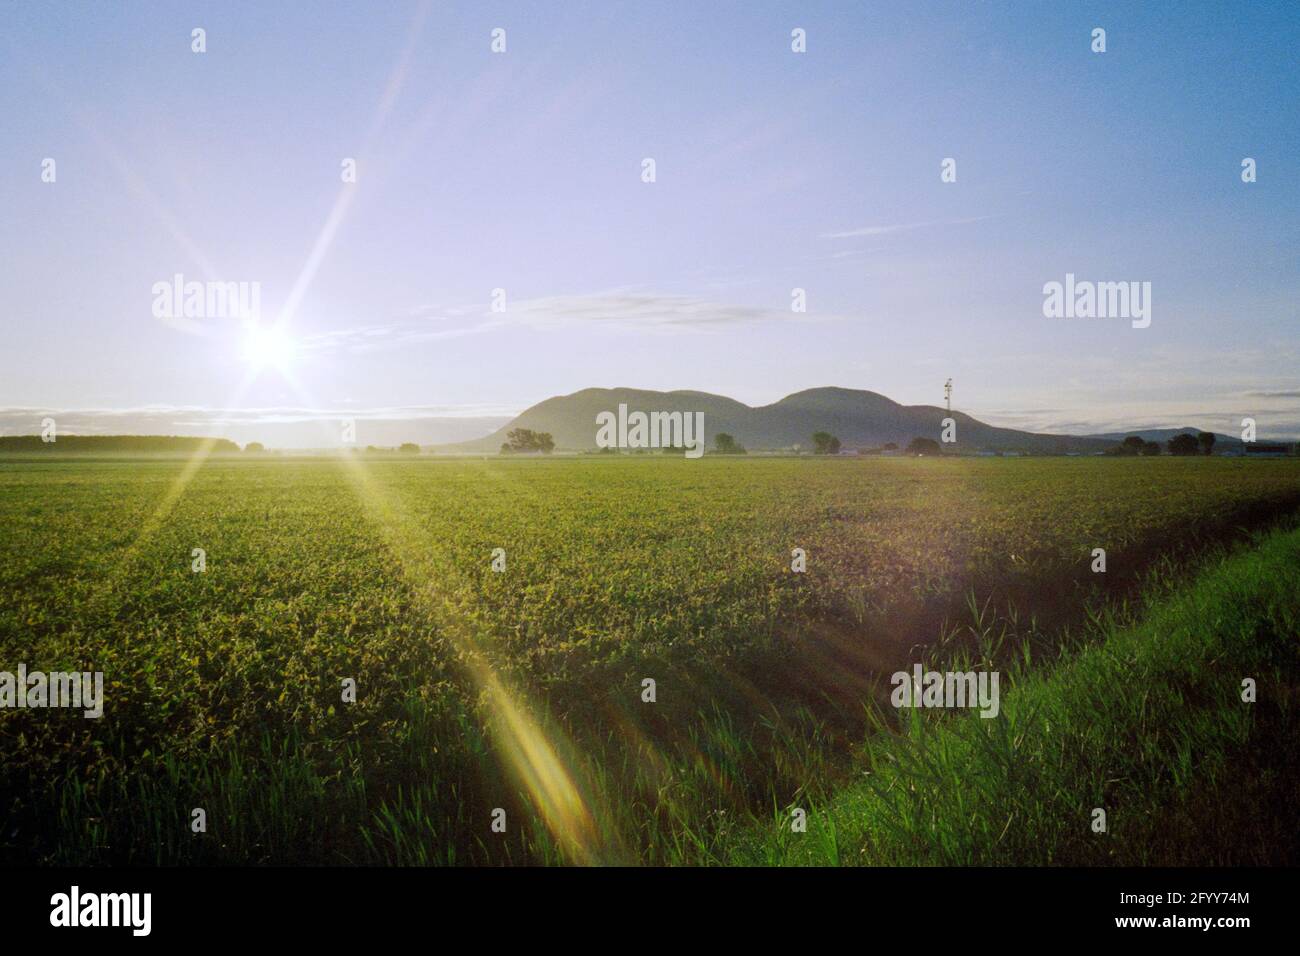 Mountain farmland and sun flare from side of road, Beloeil, Quebec, Canada, 2020 Stock Photo